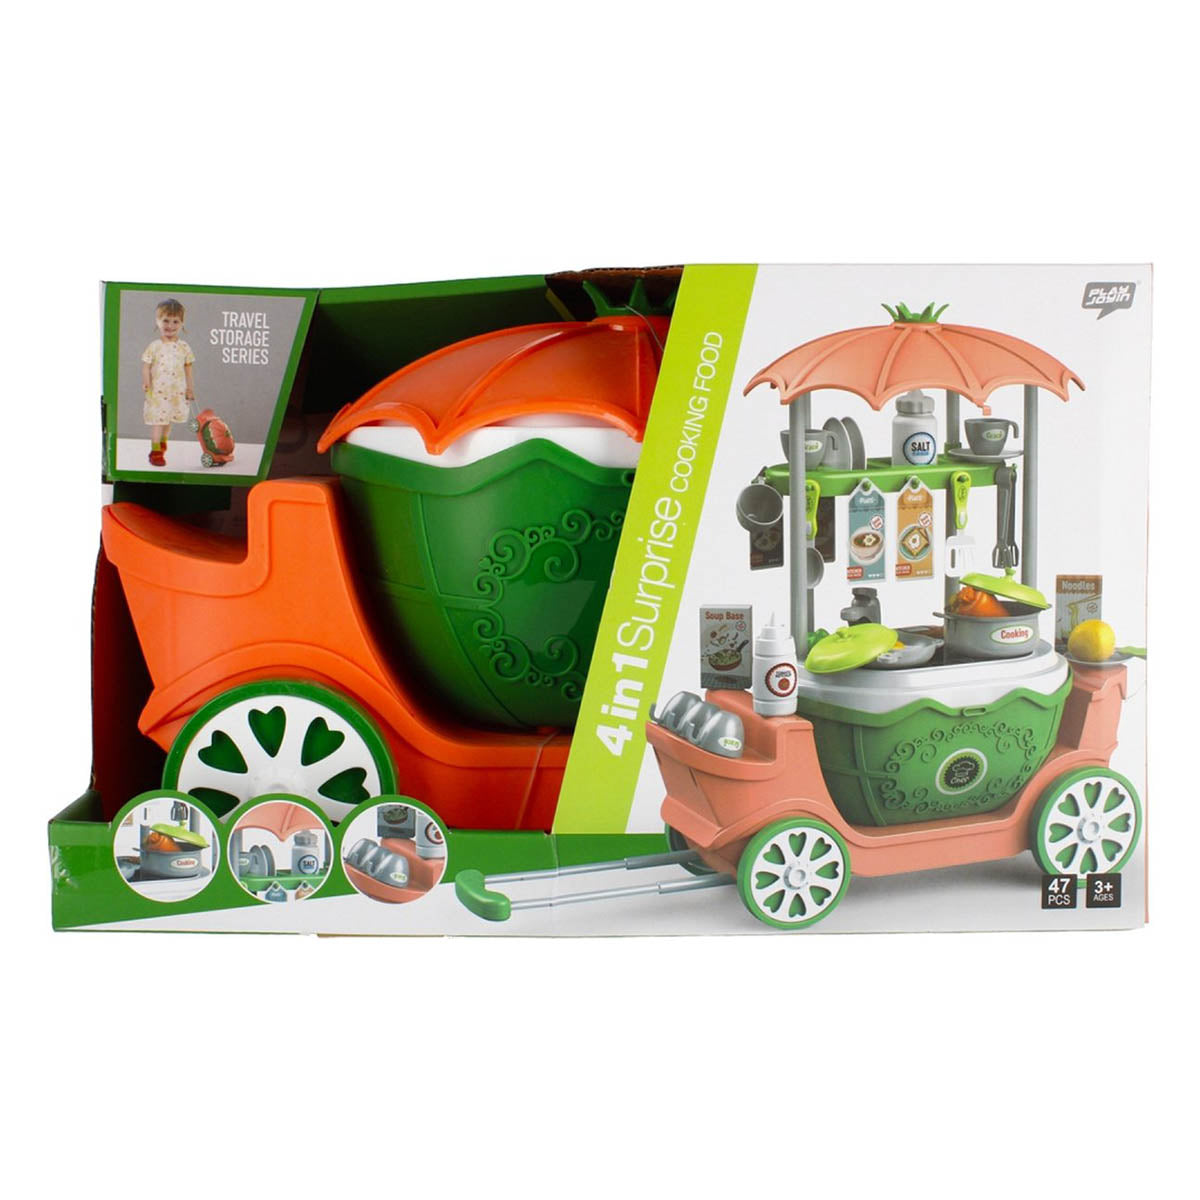 <tc>Ariko</tc> Toy trolley Kitchen 47 pieces - Cooking pots, spices, crockery, sink and much more - handy take-along suitcase with wheels